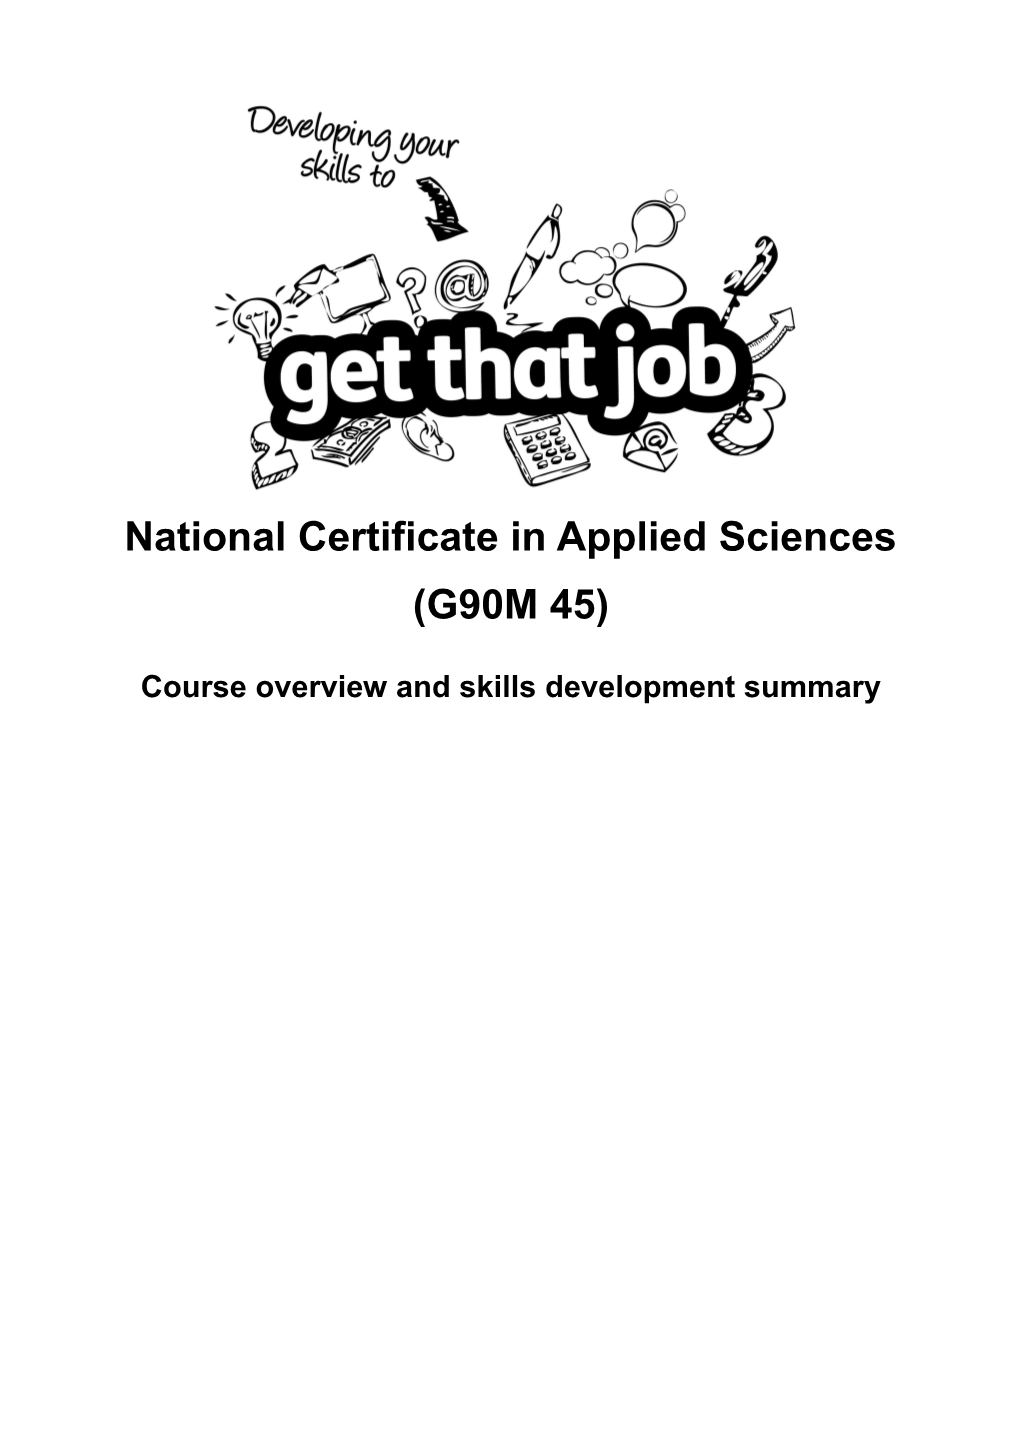 National Certificate in Applied Sciences